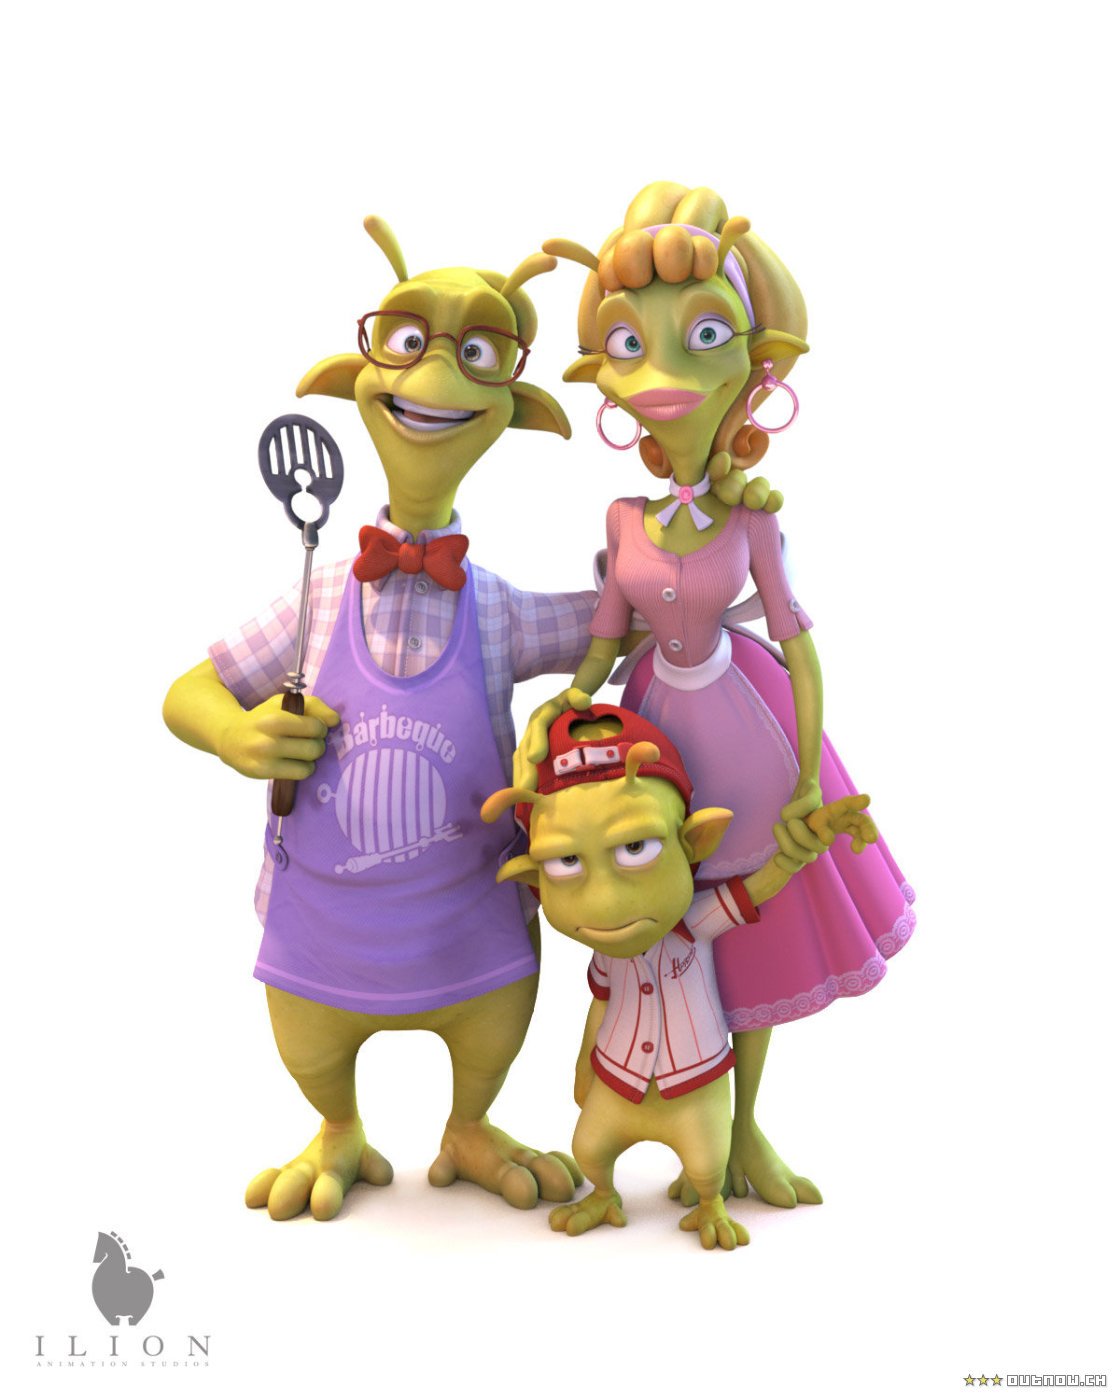 Planet 51 (2009). Sci Fi Movie Page